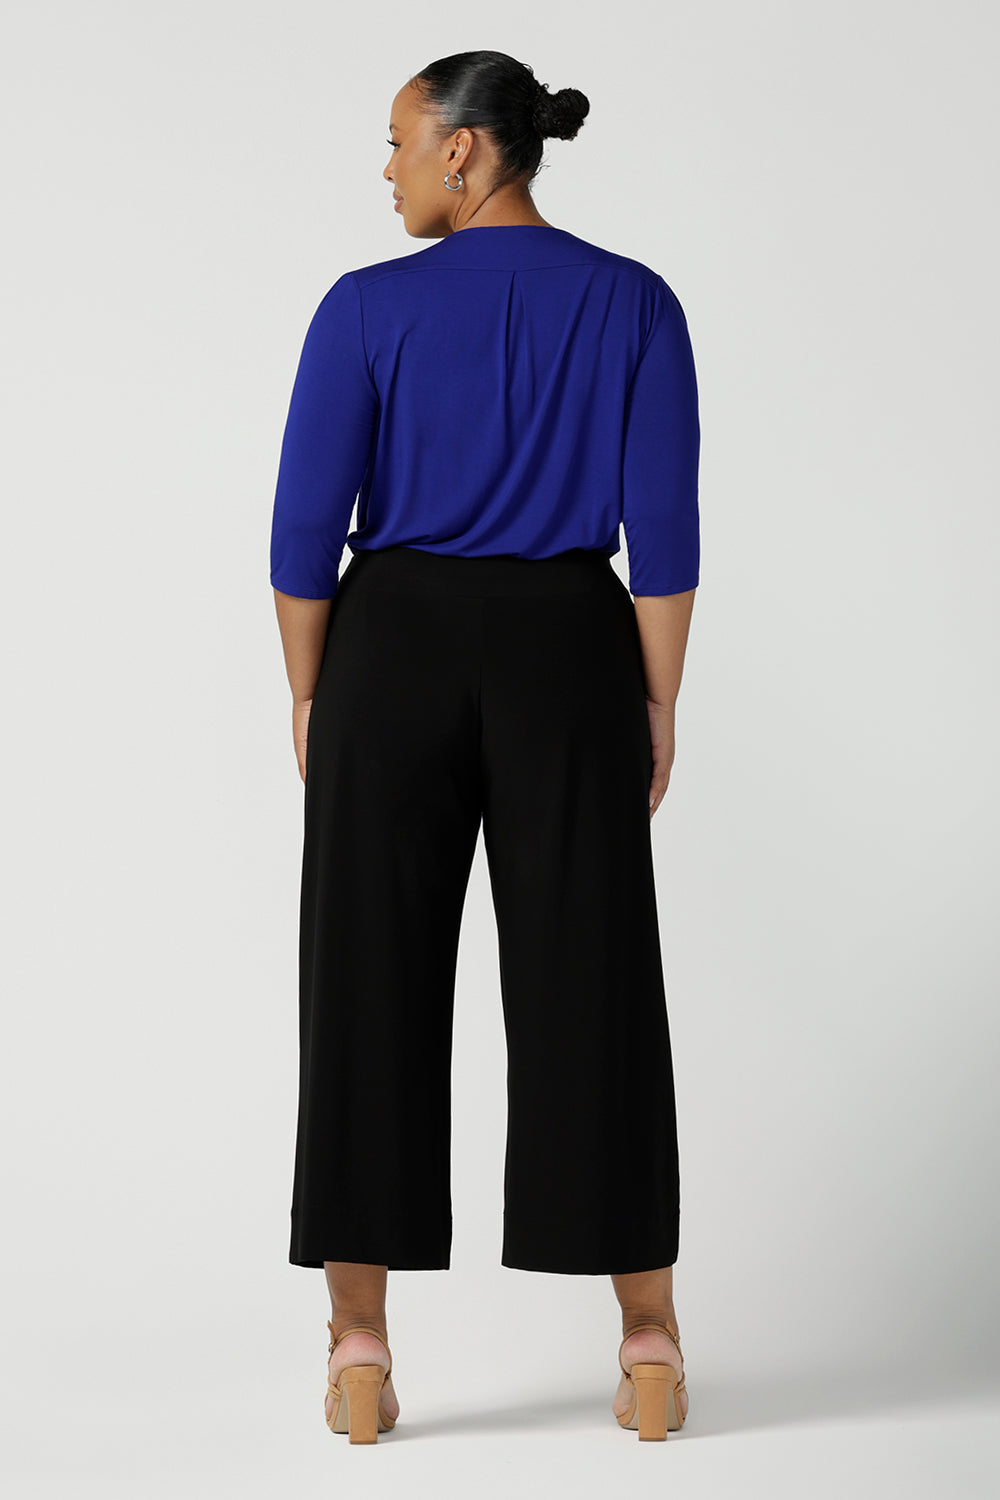 Back view of comfortable, wide leg black culotte pants are worn by a plus size, size 18 woman. Cropped pants with pockets, these pull-on trousers are made in Australia by women's clothing brand, Leina & Fleur - size inclusive, shop online in petite, mid size and plus sizes.